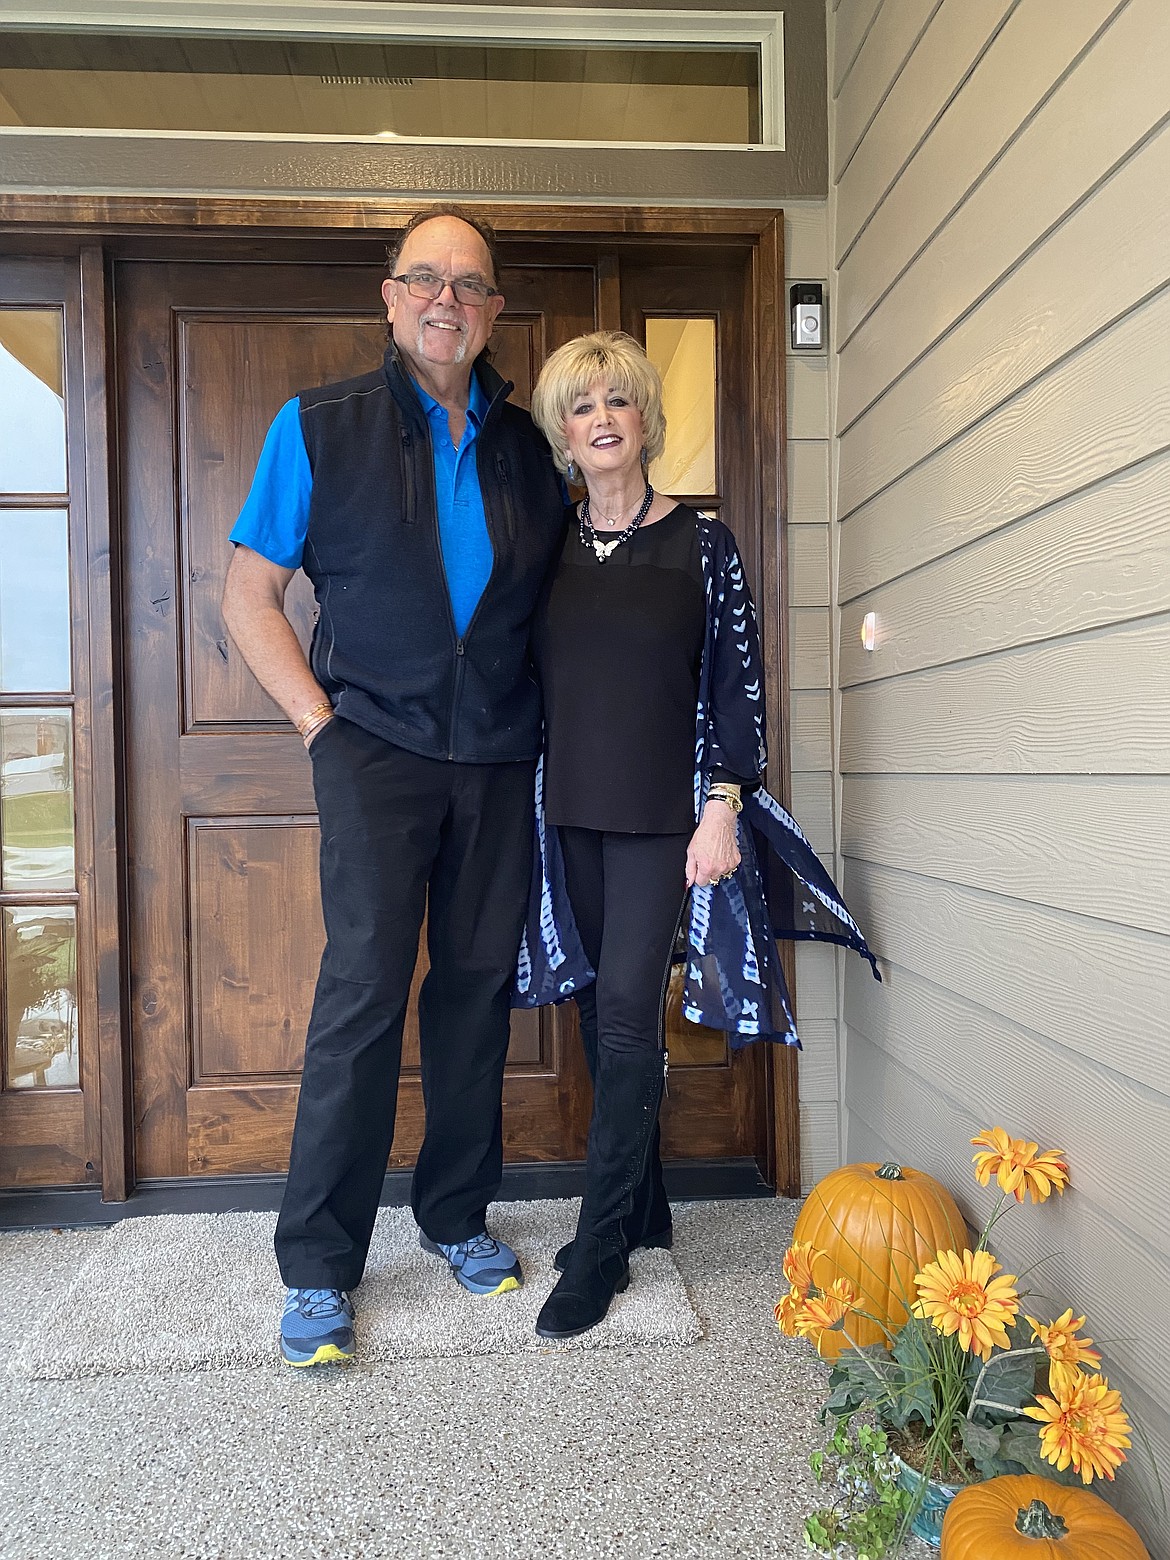 Steve and Lynn Rinker stand in front of their re-built home. Still in the process of putting things back together and replacing lost items, both are extremely grateful to be back home. A former construction worker with Viking Construction, Steve did a lot of the re-build himself.